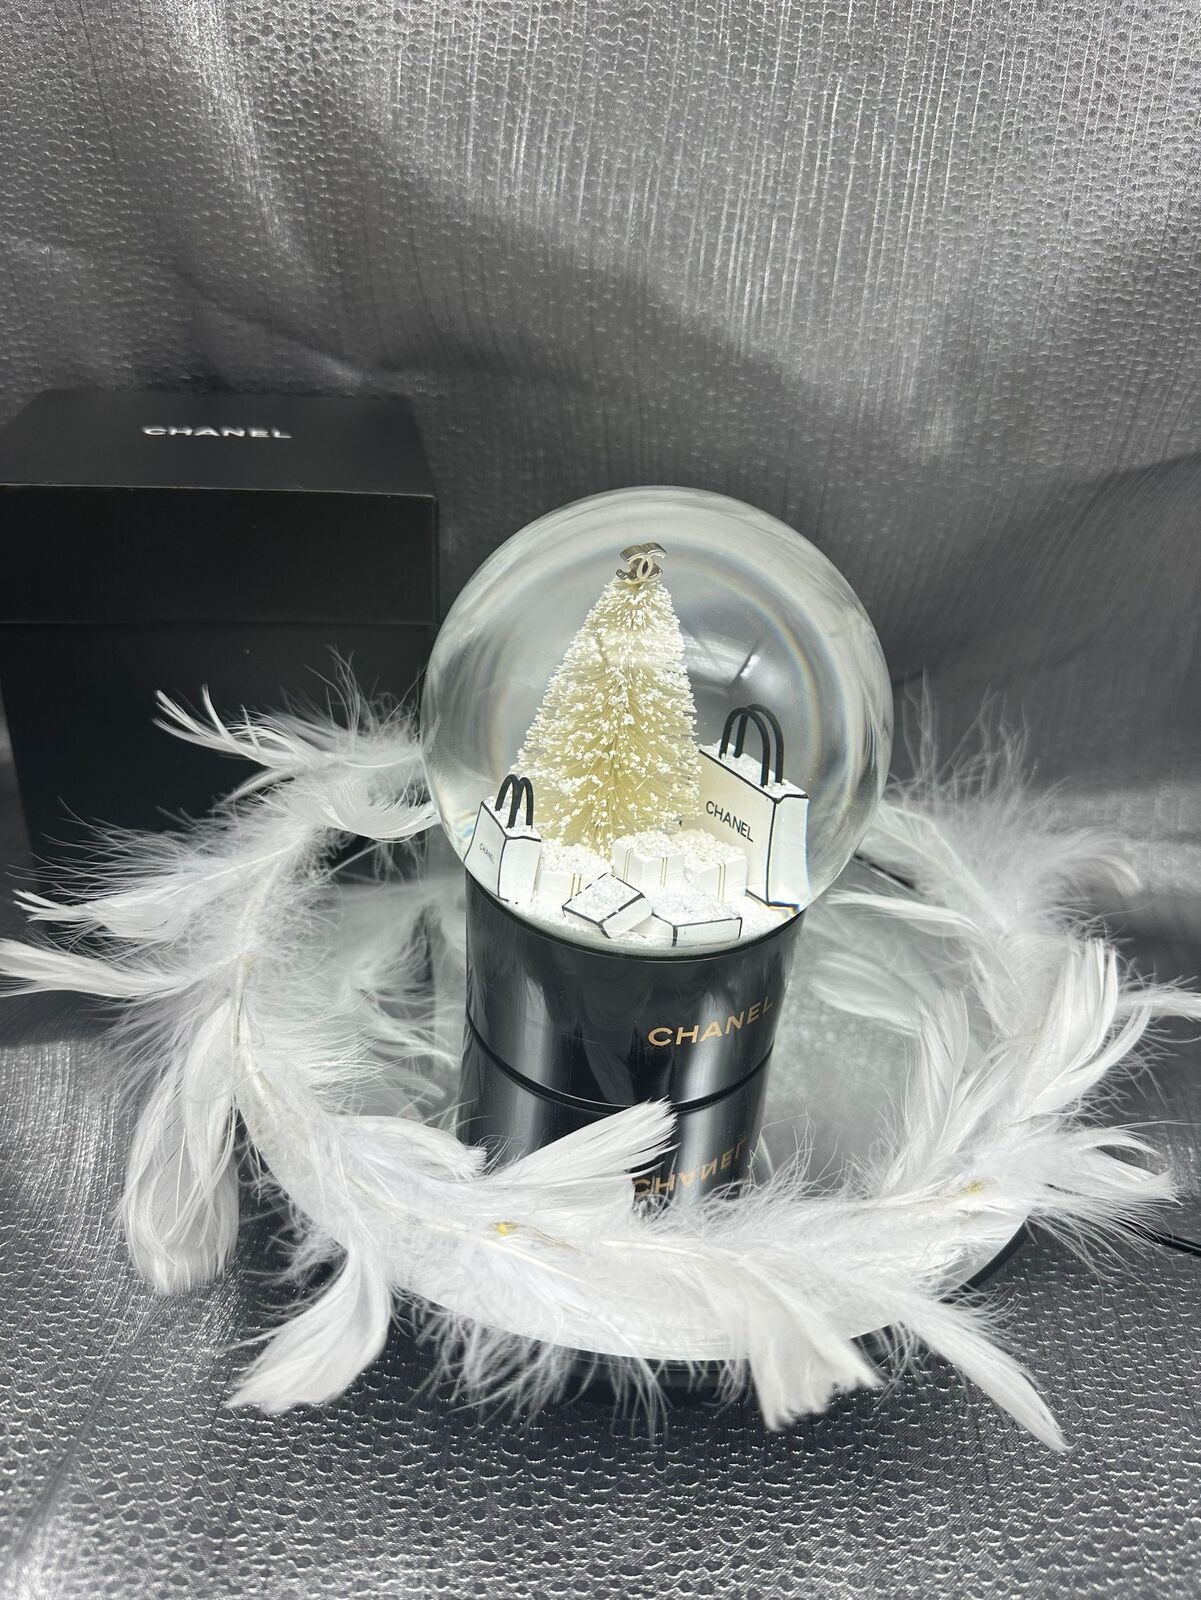 Authentic Chanel Snow Globe Large Beautiful Limited Edition Christmas Gift